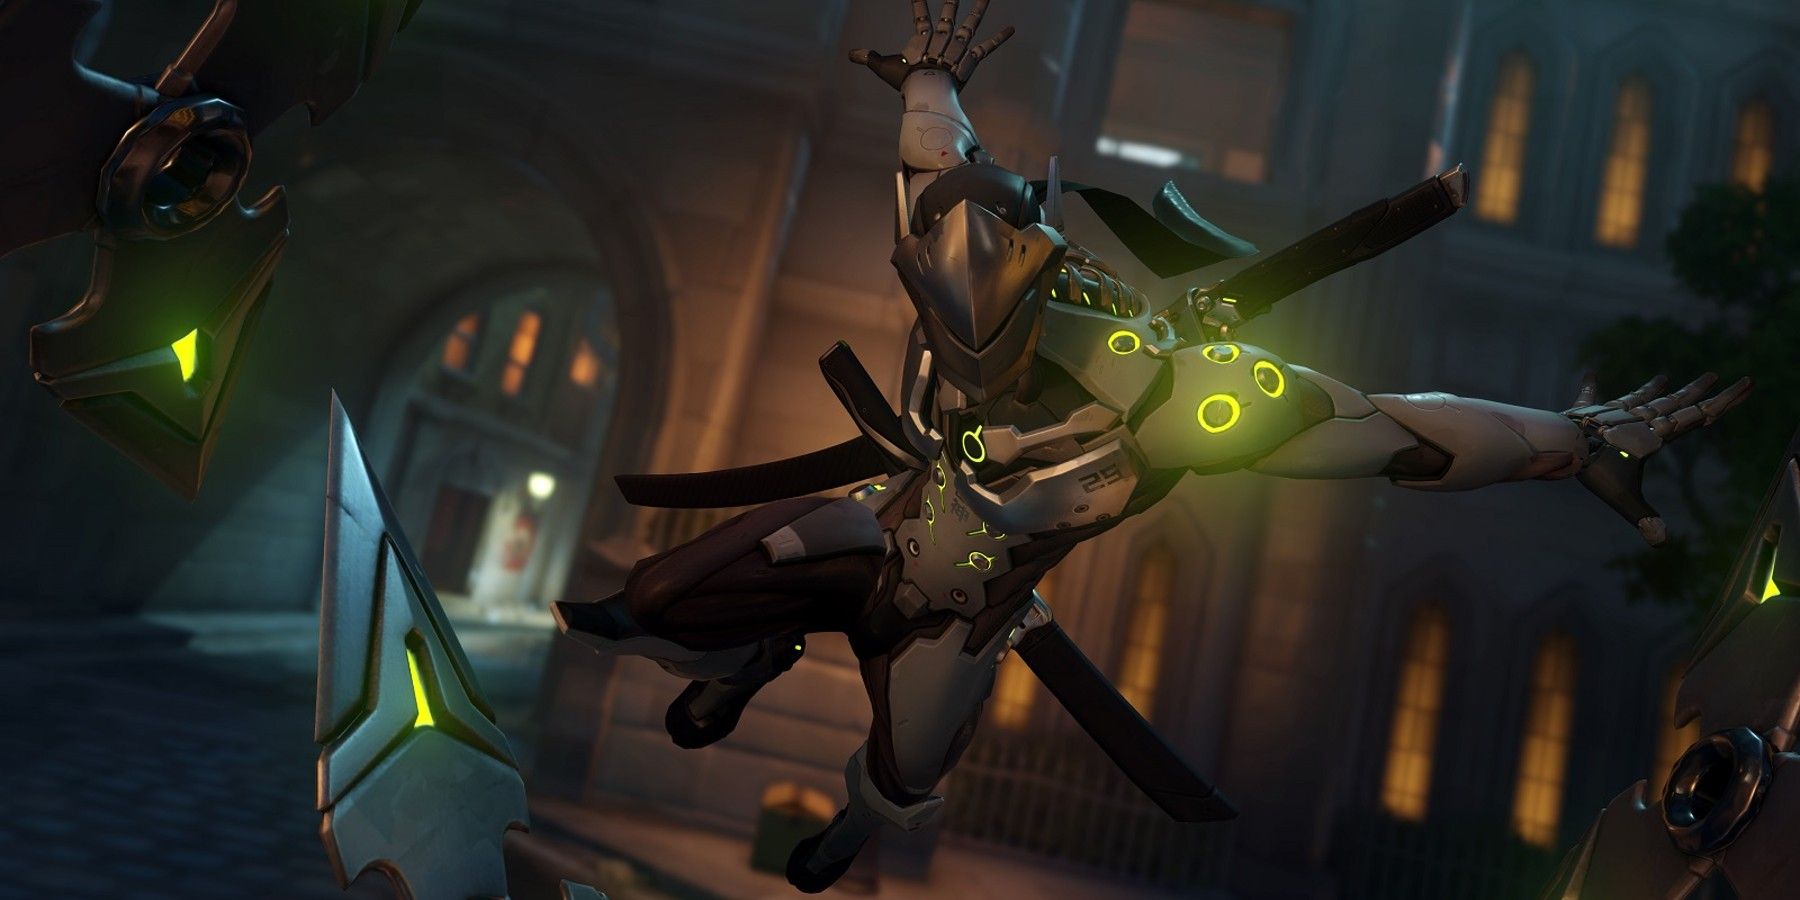 Overwatch: Genji Bug Allows a Permanent Dragonblade, by Sam Lee